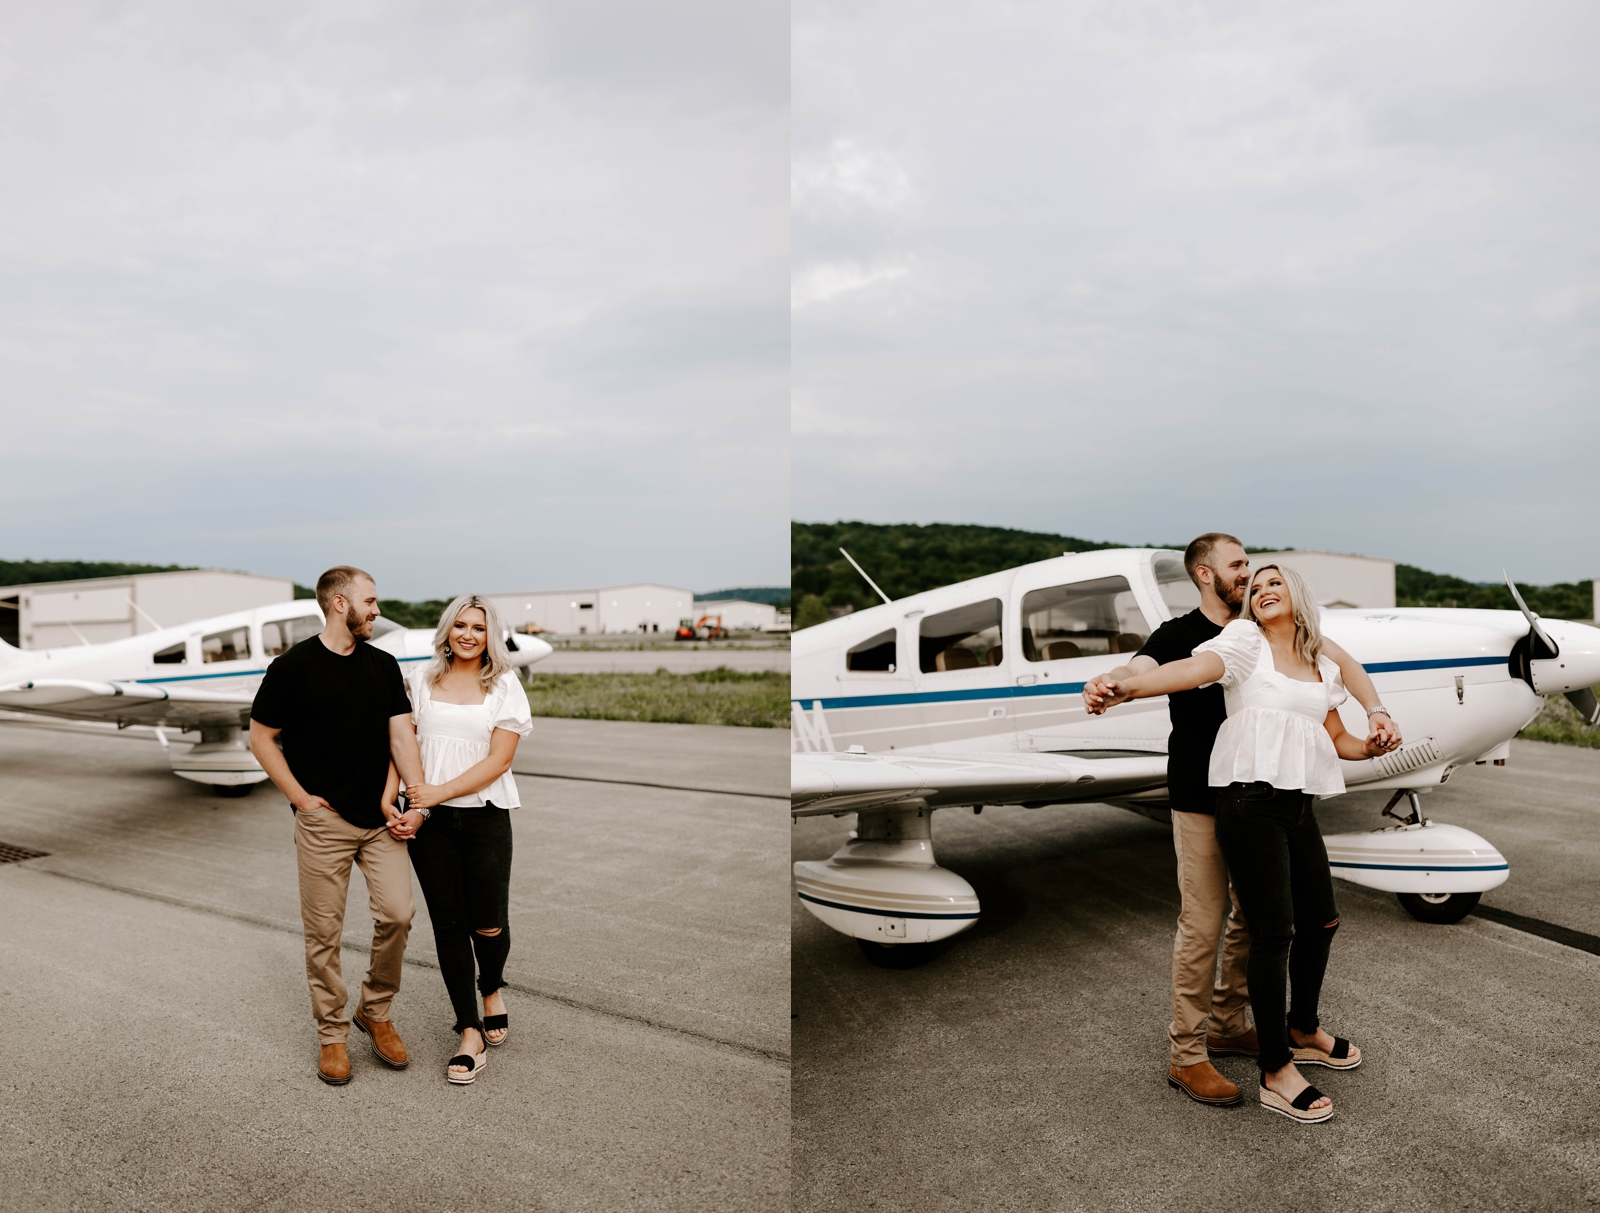 Pittsburgh engagement photo locations; airstrip; airplane photos